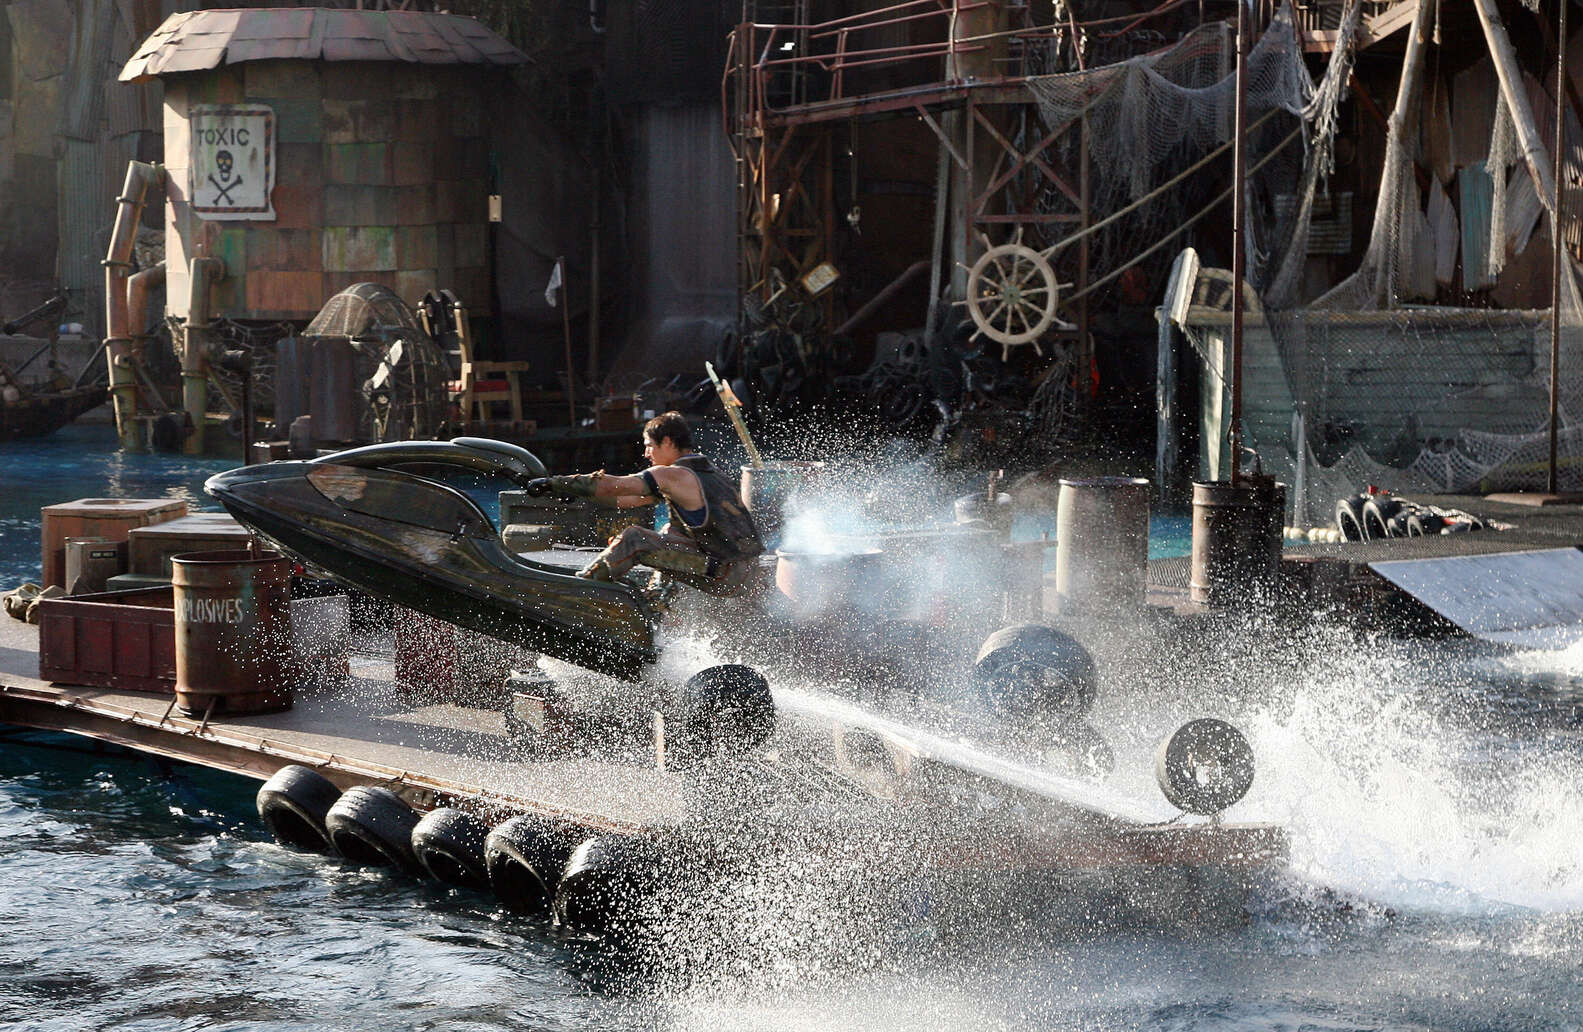 How the 'Waterworld' Show at Universal Studios Hollywood Became a Hit